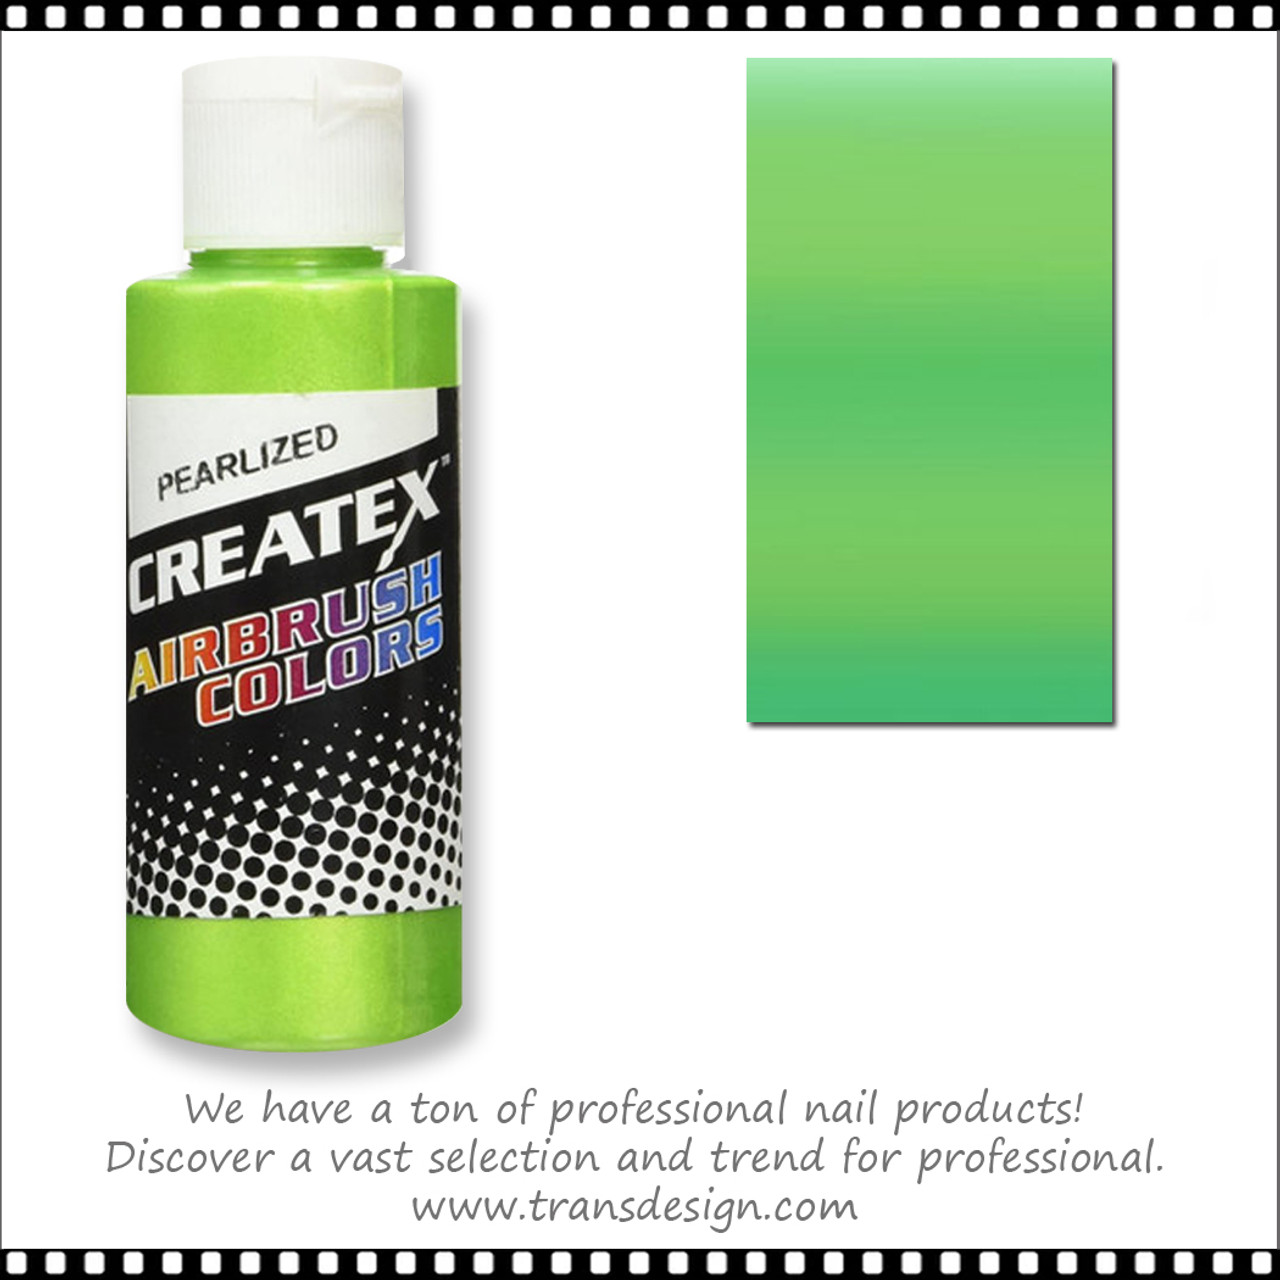 Createx Airbrush Colors Pearlized Liquid Acrylic Paint Pearl Red 2